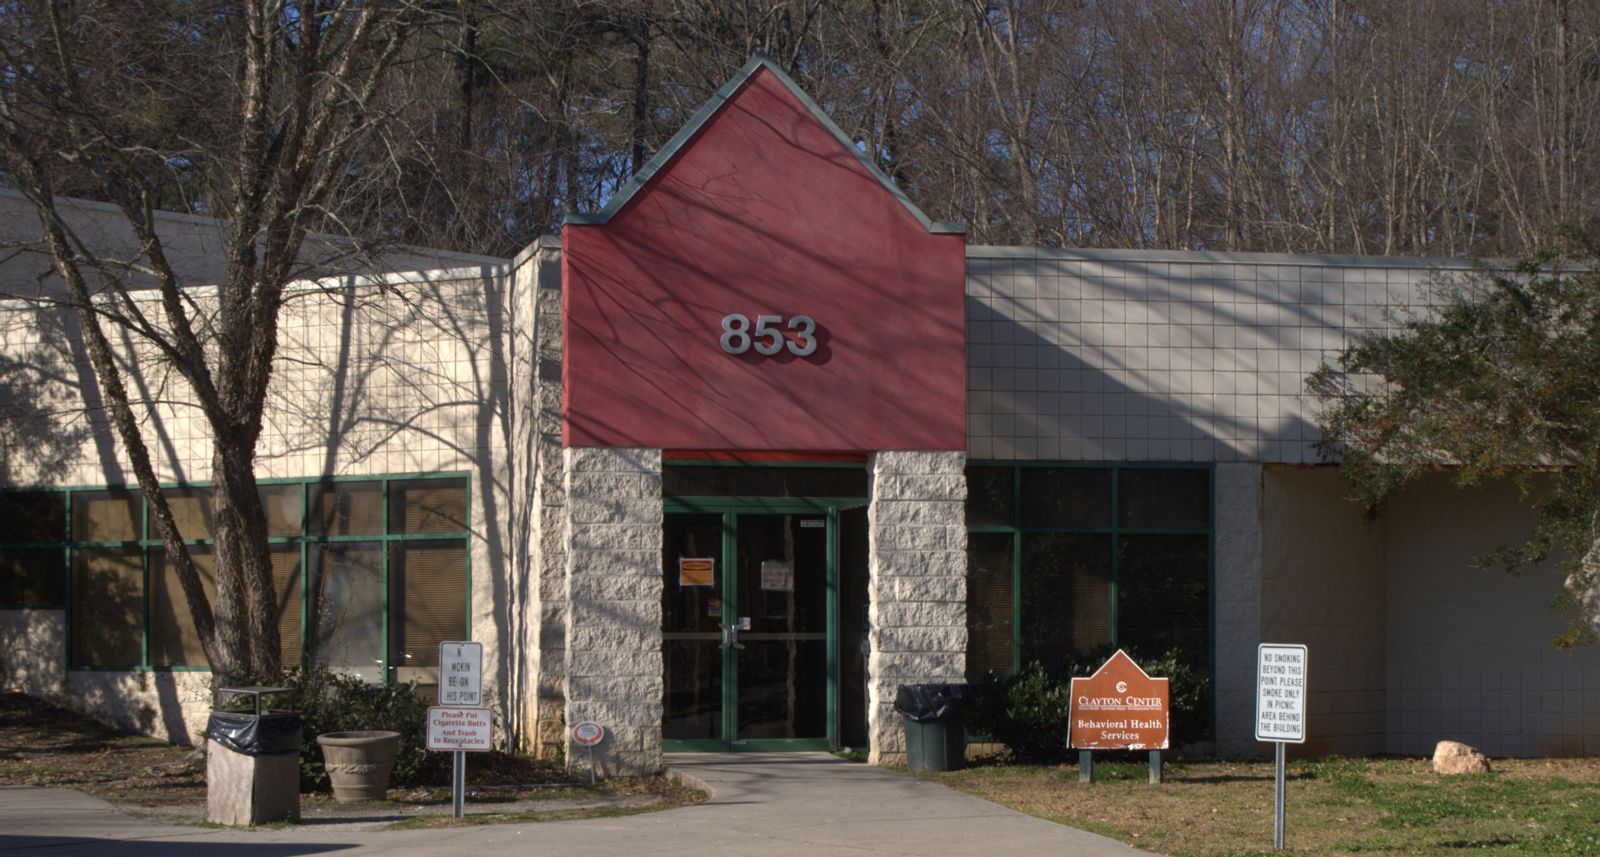 Behavioral Health - Addictive Diseases and Adult Counseling Services building is located at 853 Battle Creek Road in Jonesboro